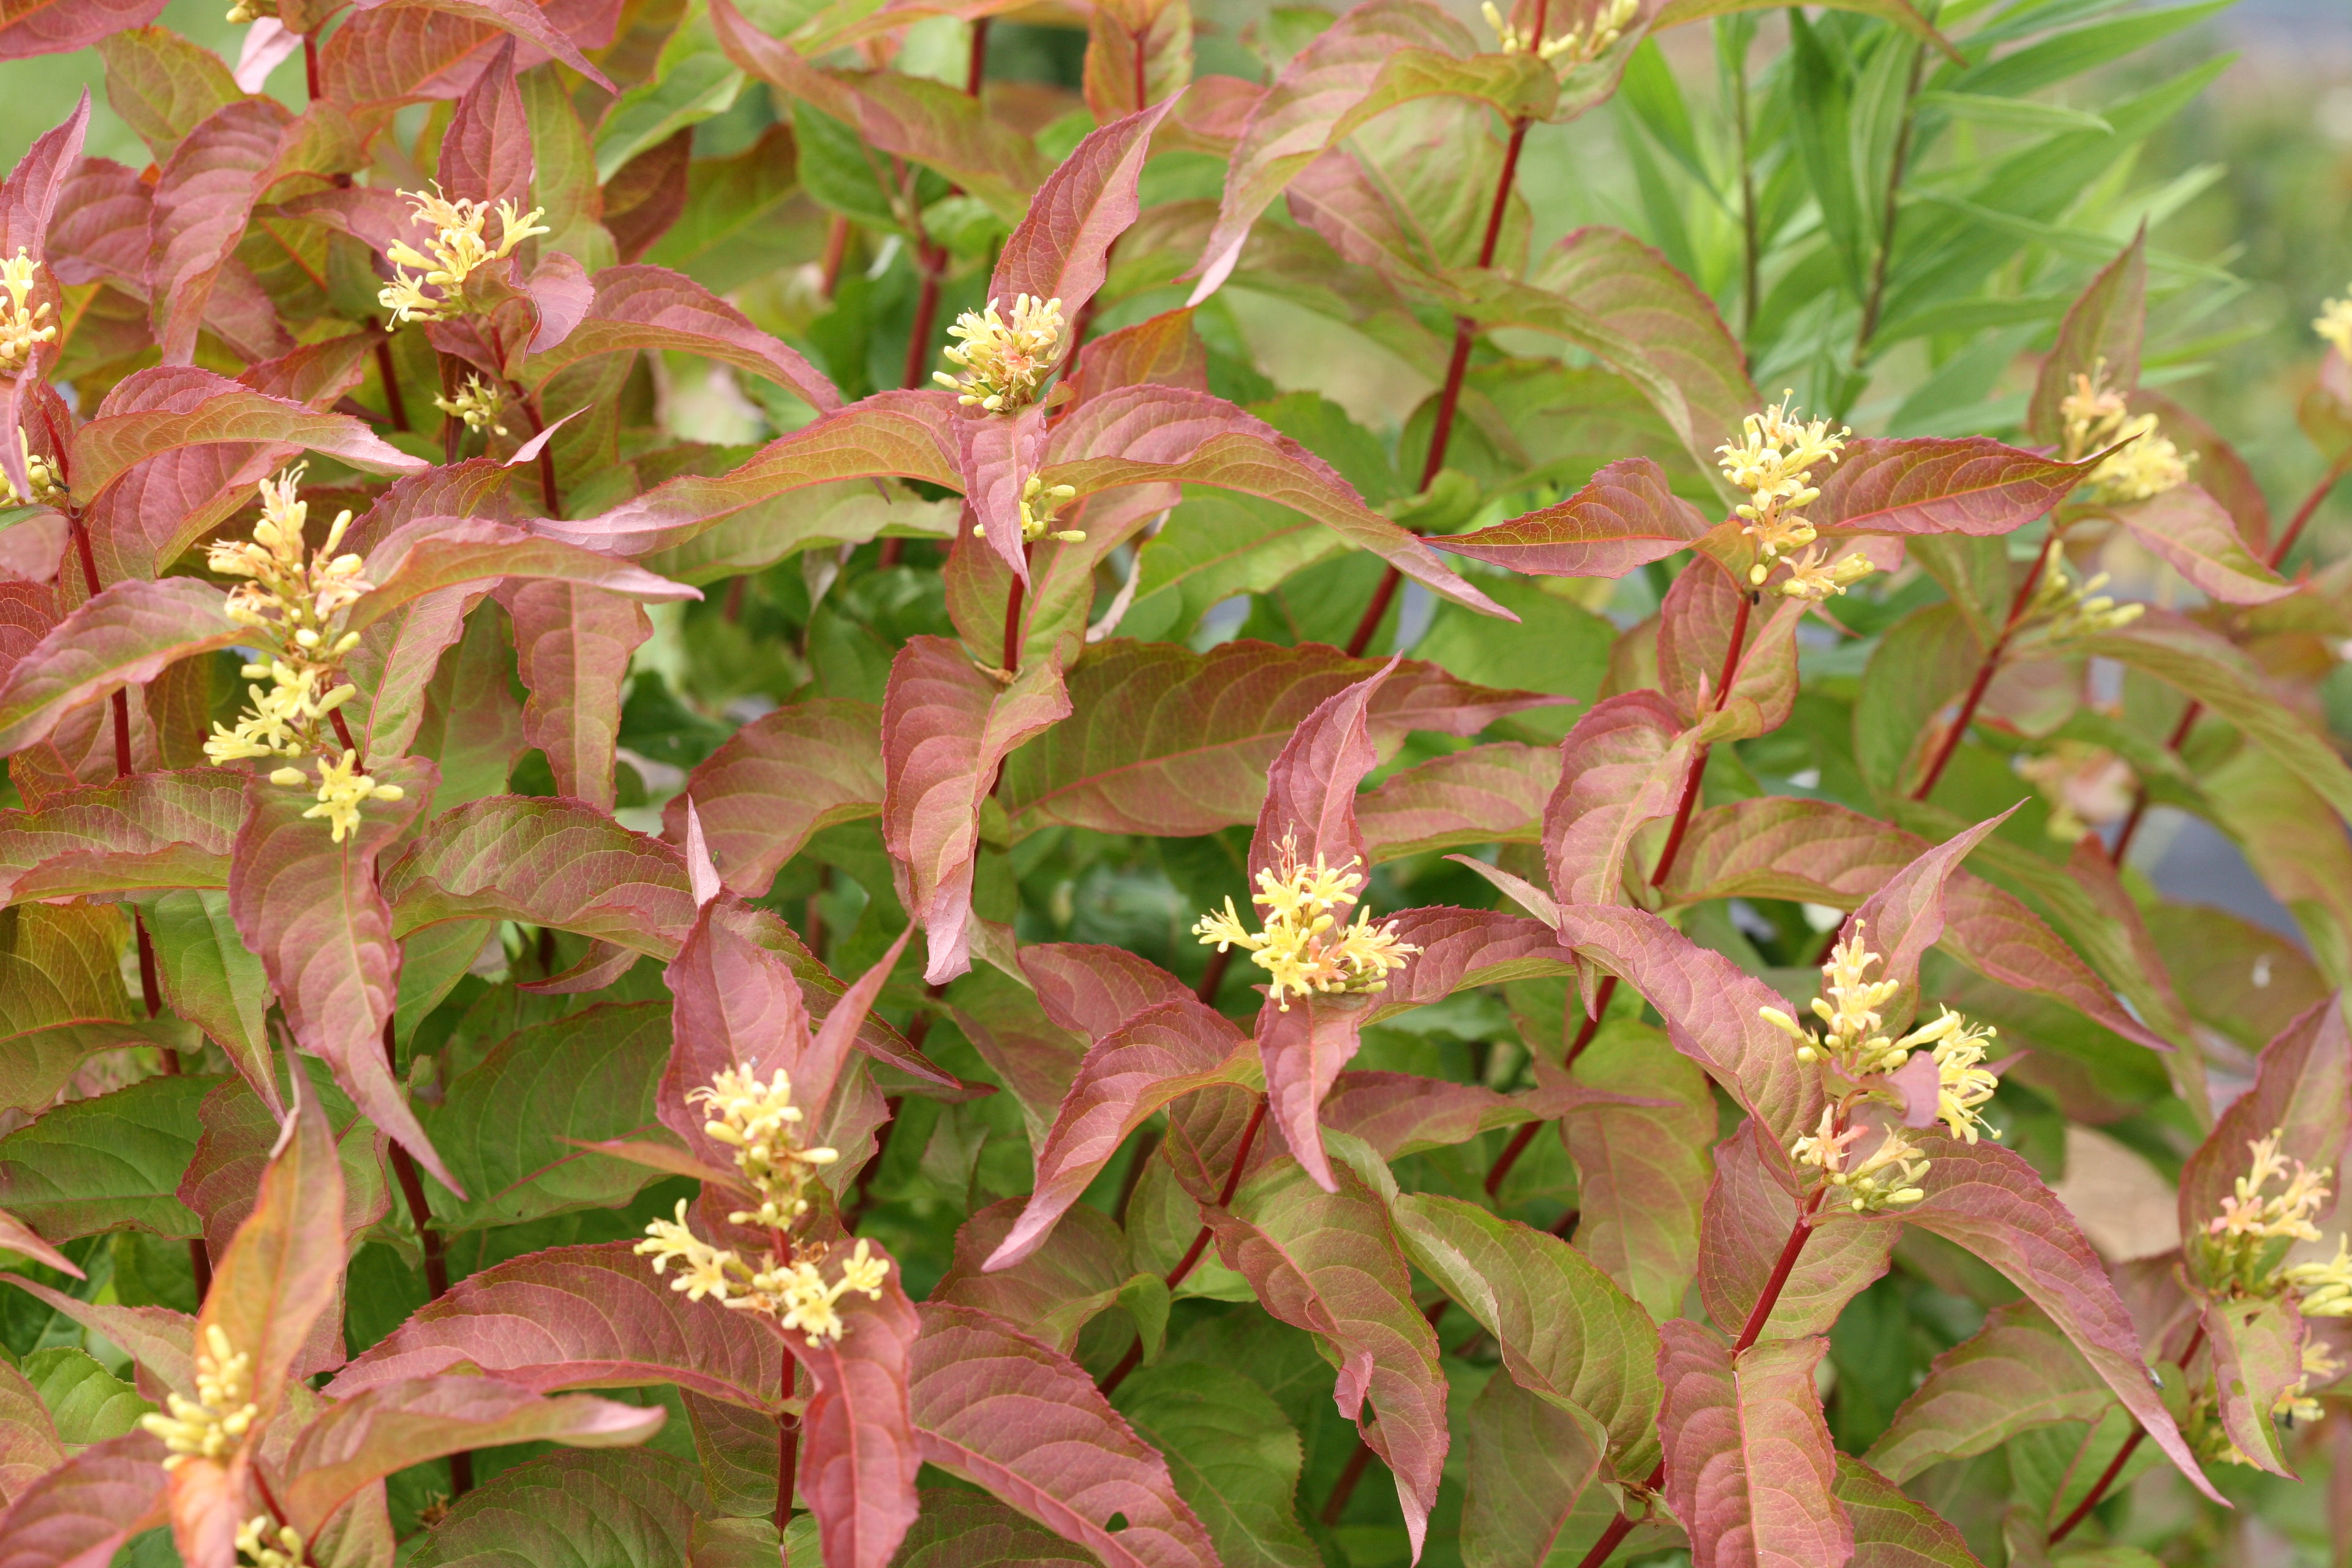 The stems of Kodiak Orange diervilla laden with bright orange leaves and yellow flowers.